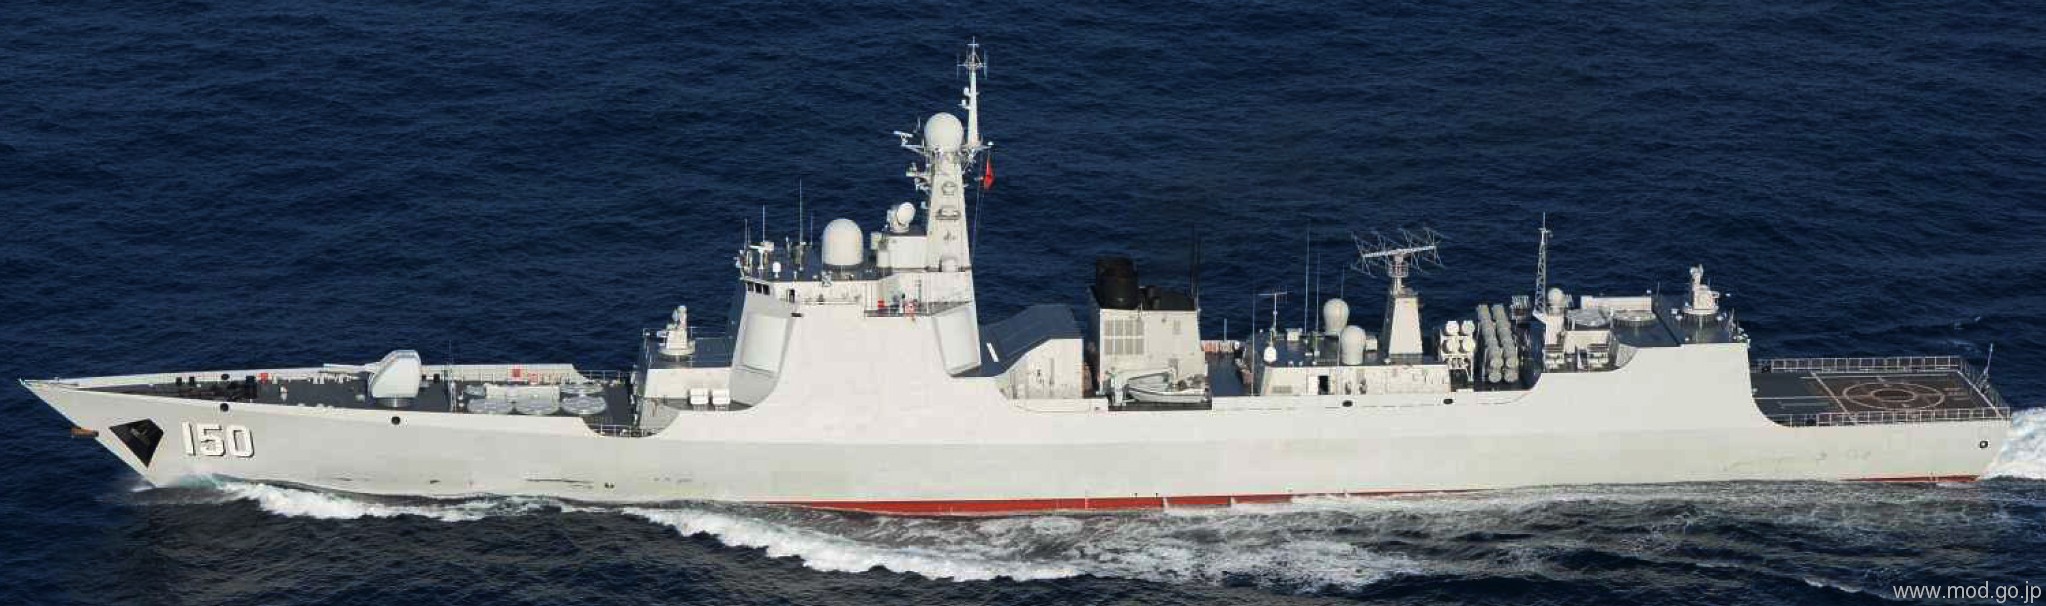 ddg-150 plans changchun type 052c class guided missile destroyer china people's liberation army navy 02